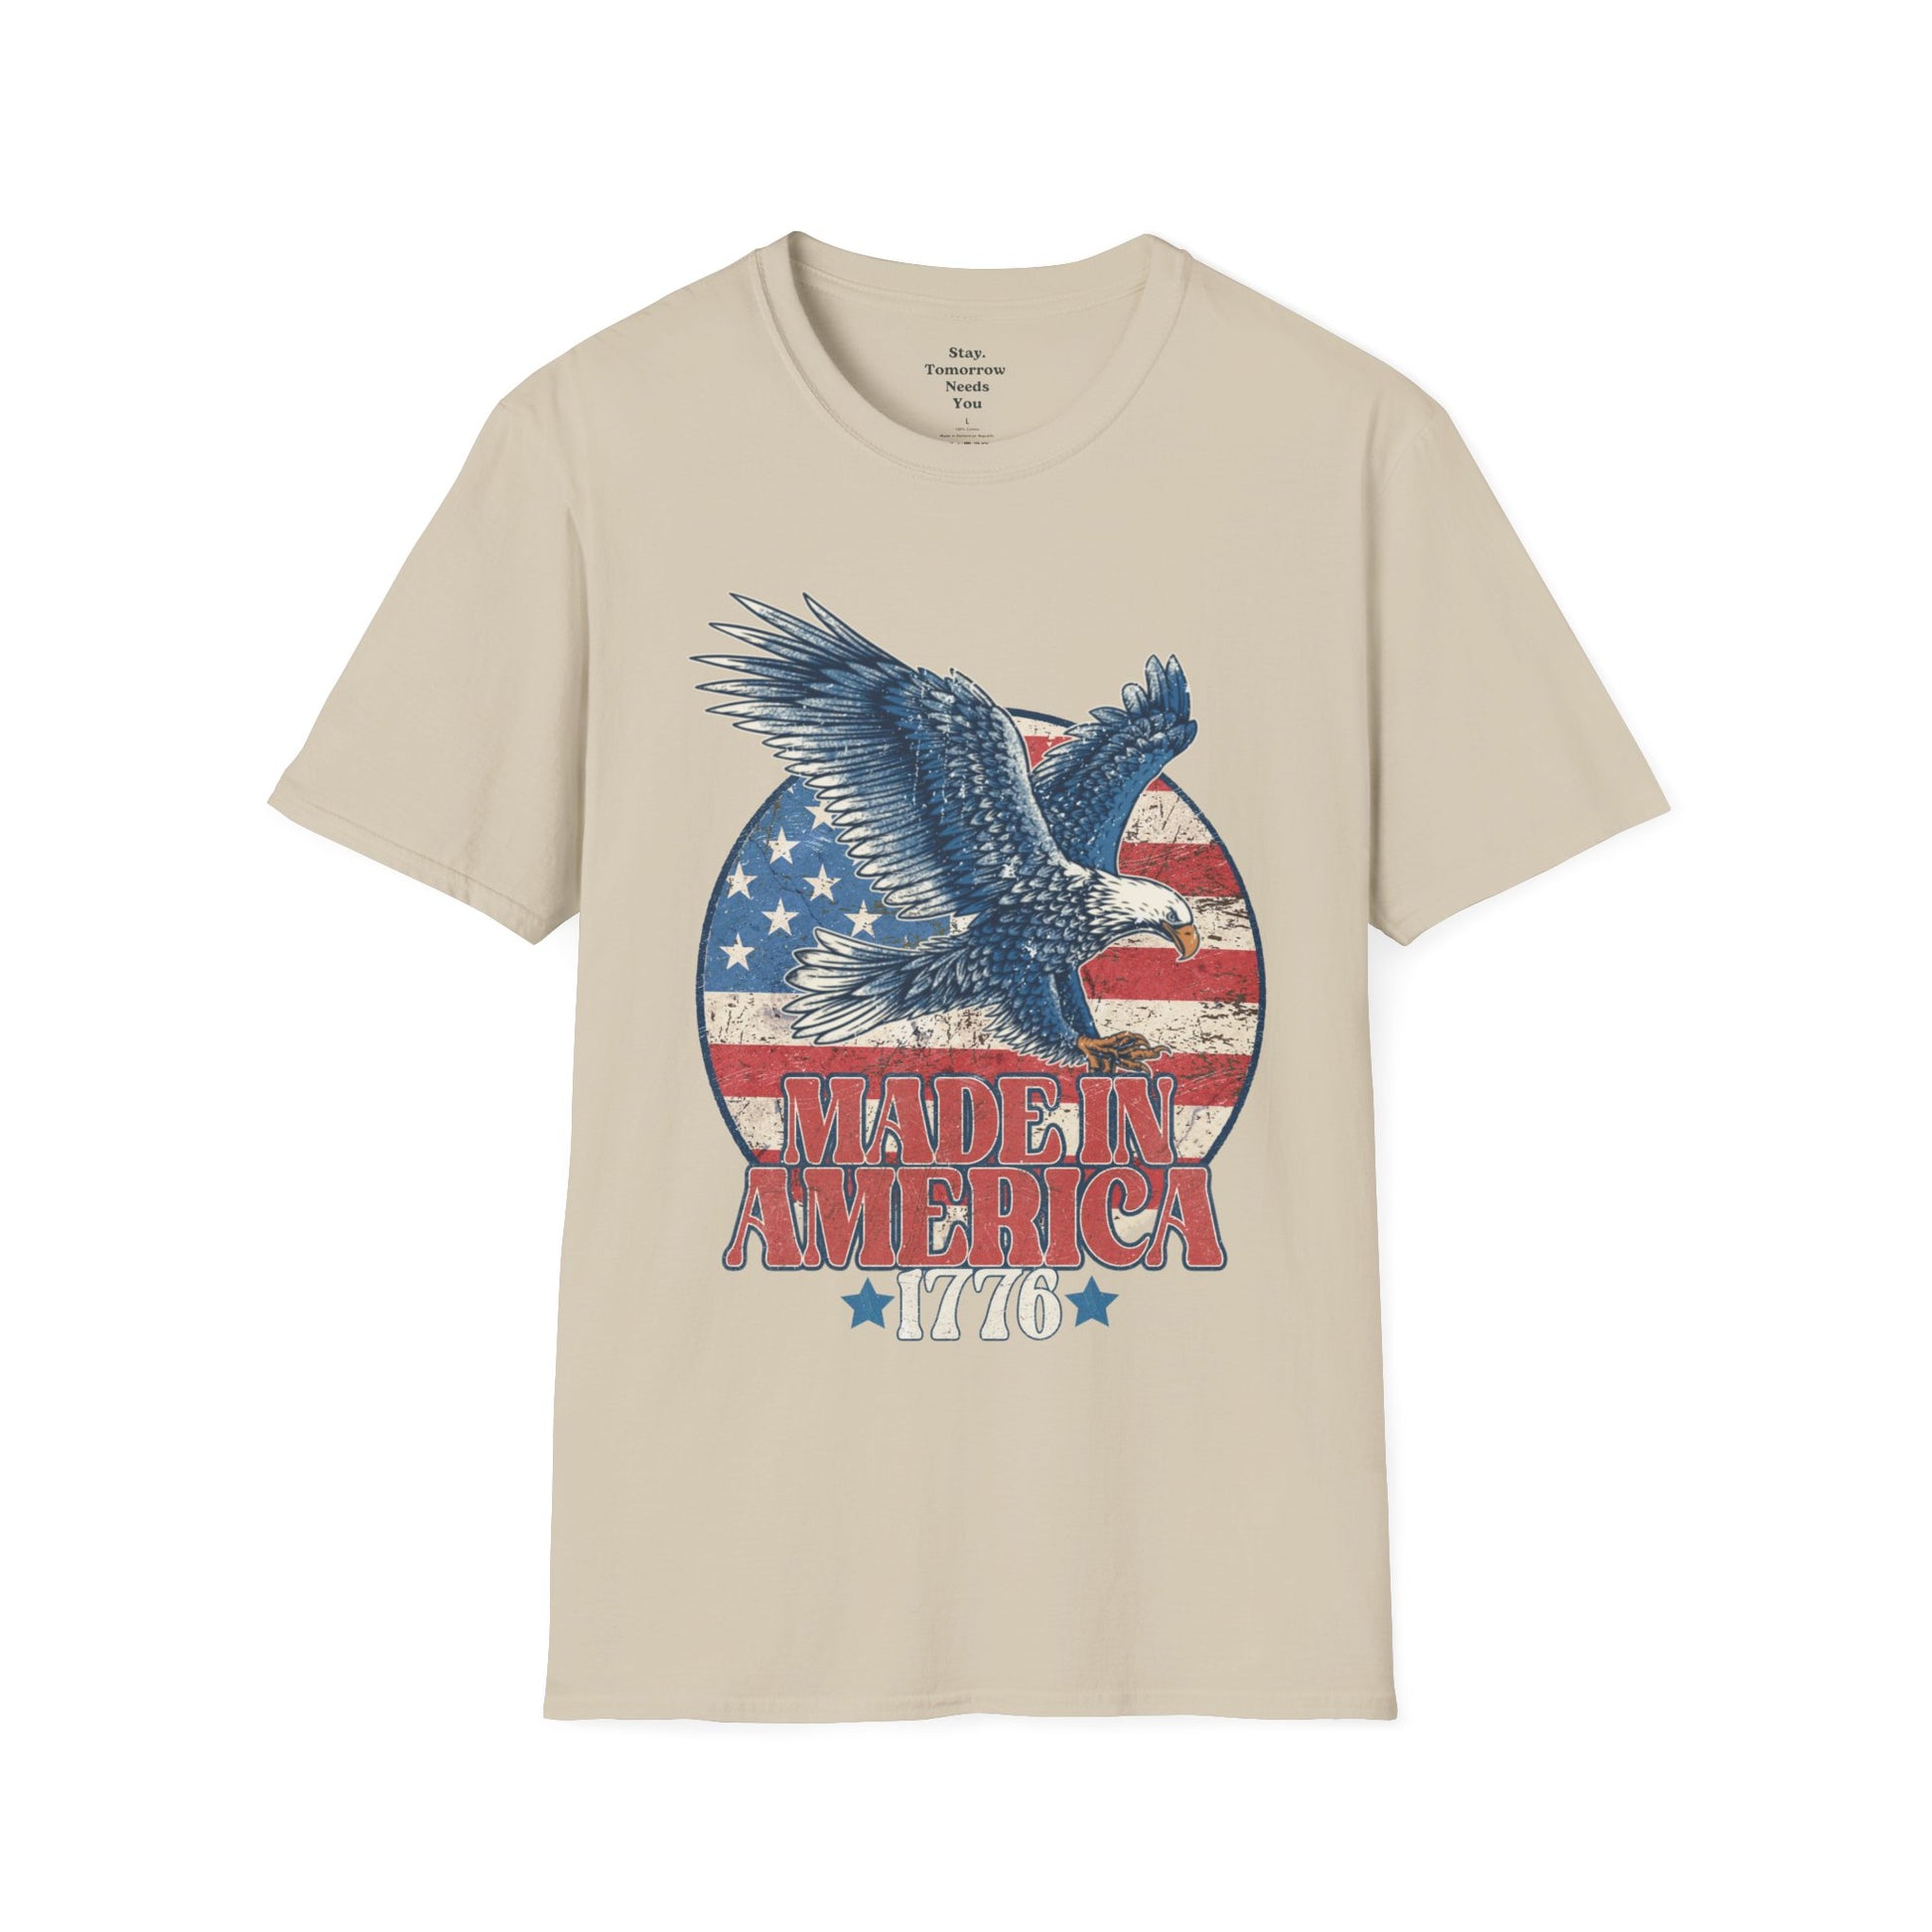 Retro 4th of July T shirt 2024 Distressed American Flag Eagle 1776 Made in America Vintage Patriotic America Freedom Fourth of July Independence Day T shirt - Stay Tomorrow Needs You Retro 4th of July T shirt 2024 Distressed American Flag Eagle 1776 Made in America Vintage Patriotic America Freedom Fourth of July Independence Day T shirt